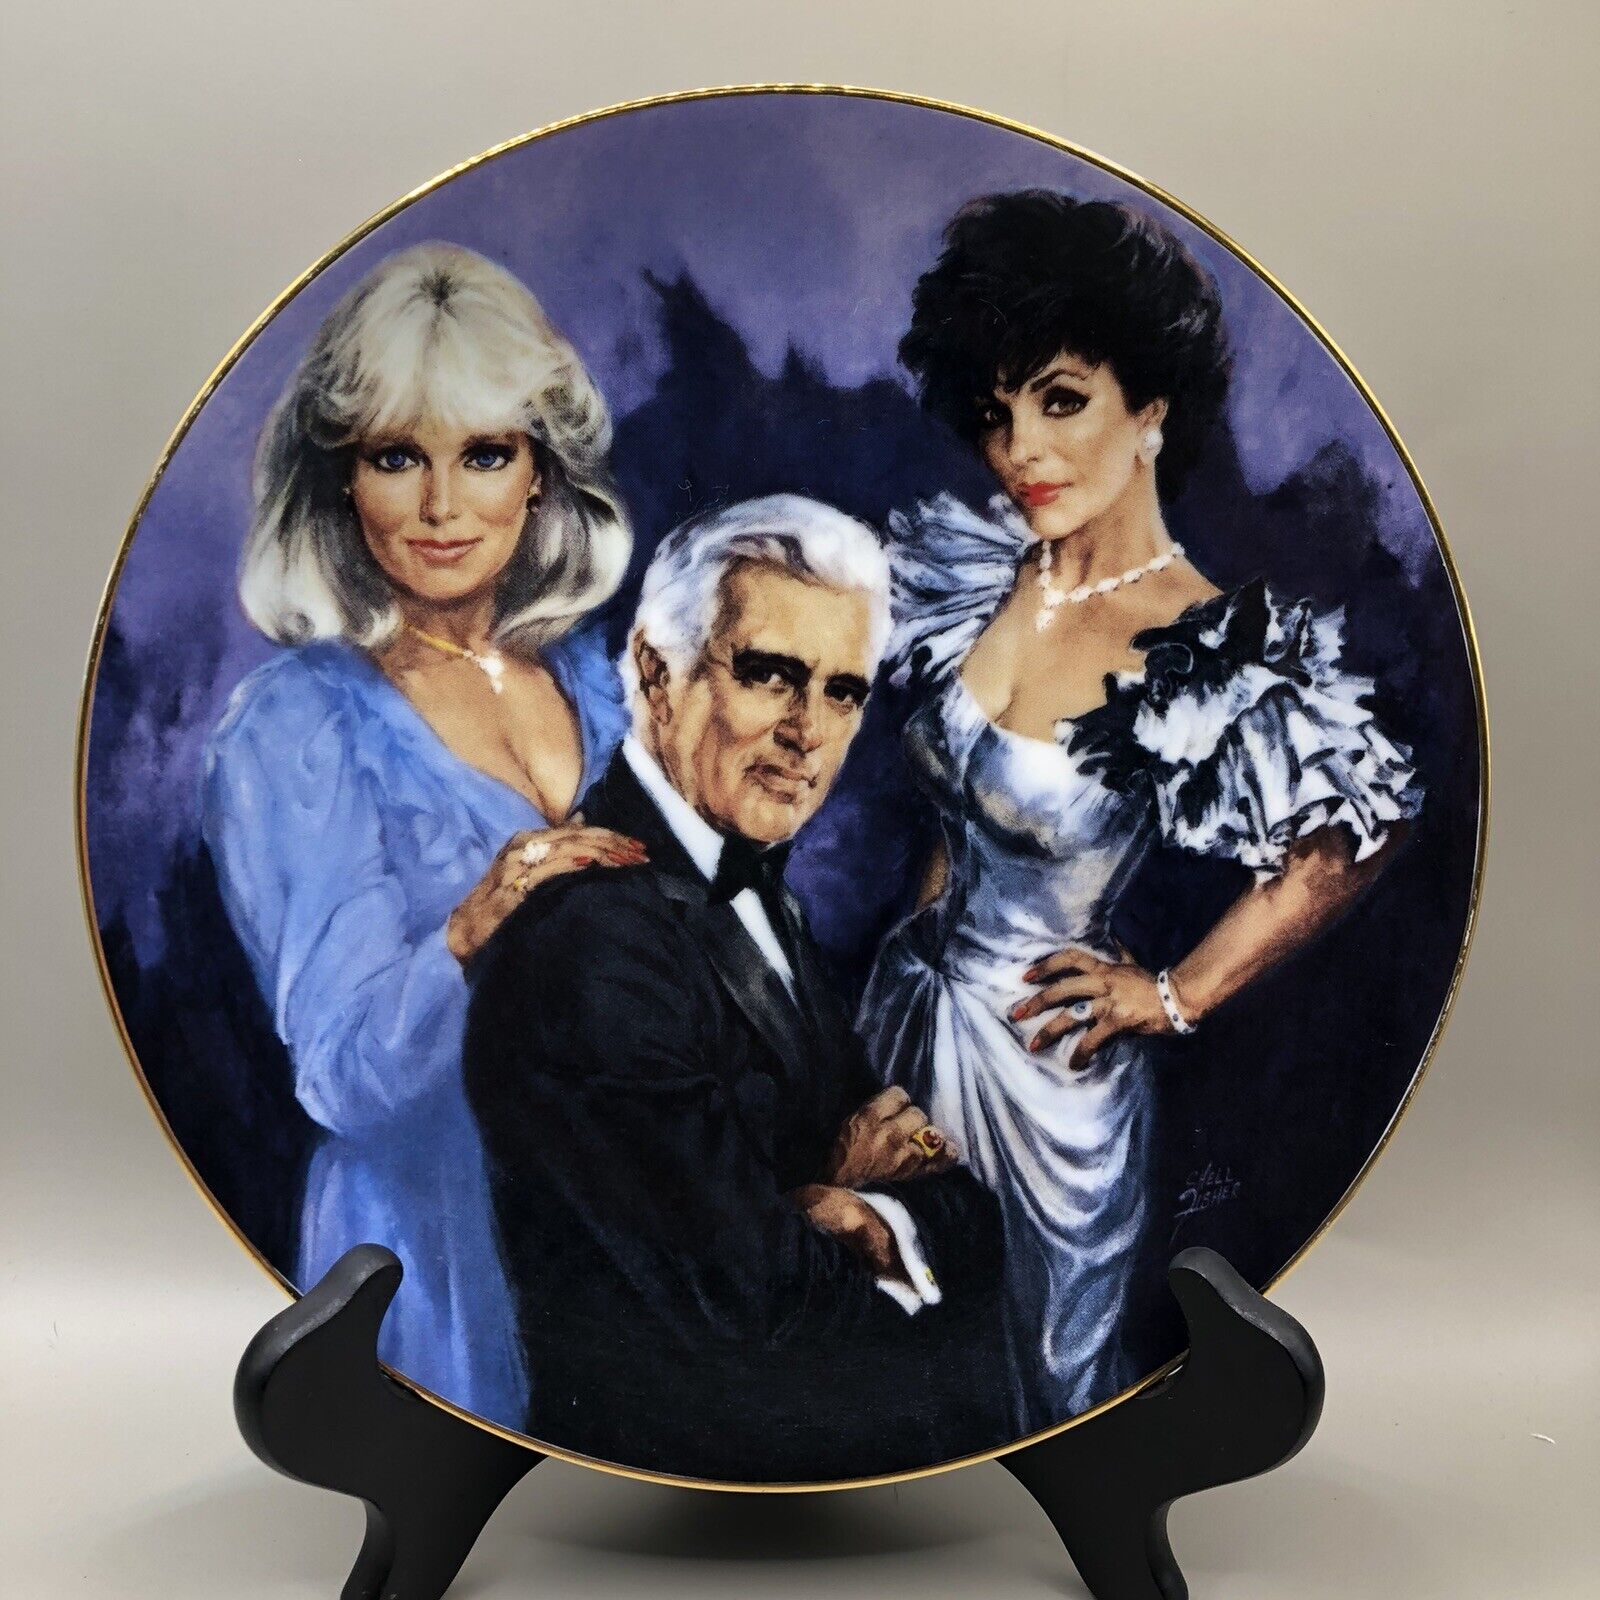 Vintage 1985 Royal Orleans Dynasty TV Series Collectible Plate Limited Edition